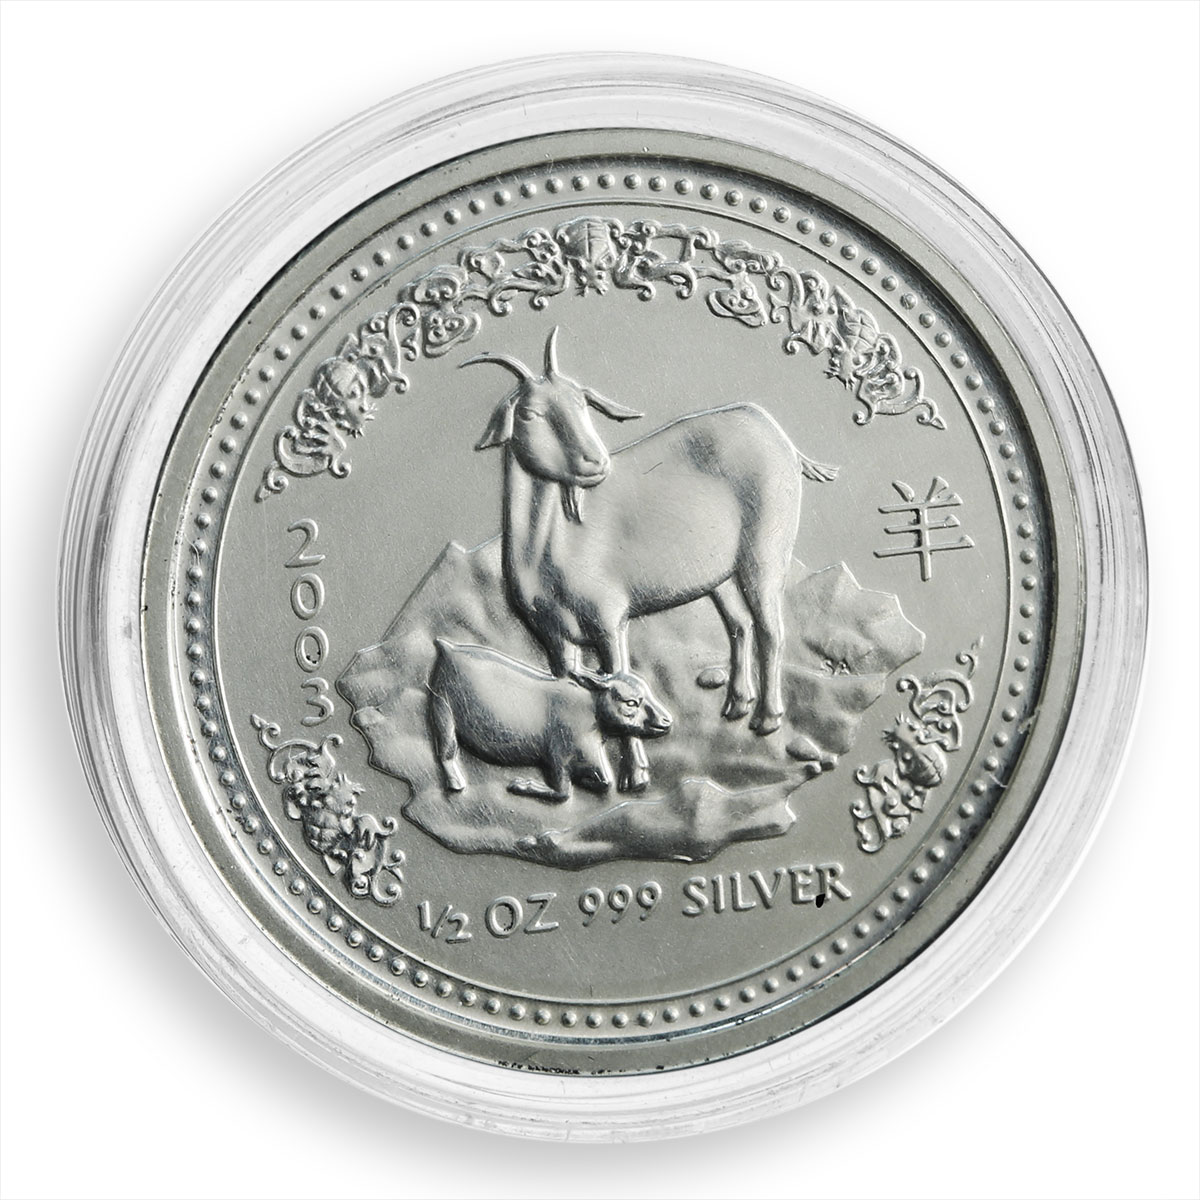 Australia 50 cents Year of The Goat Lunar Series II 1/2 oz Silver Coin 2003